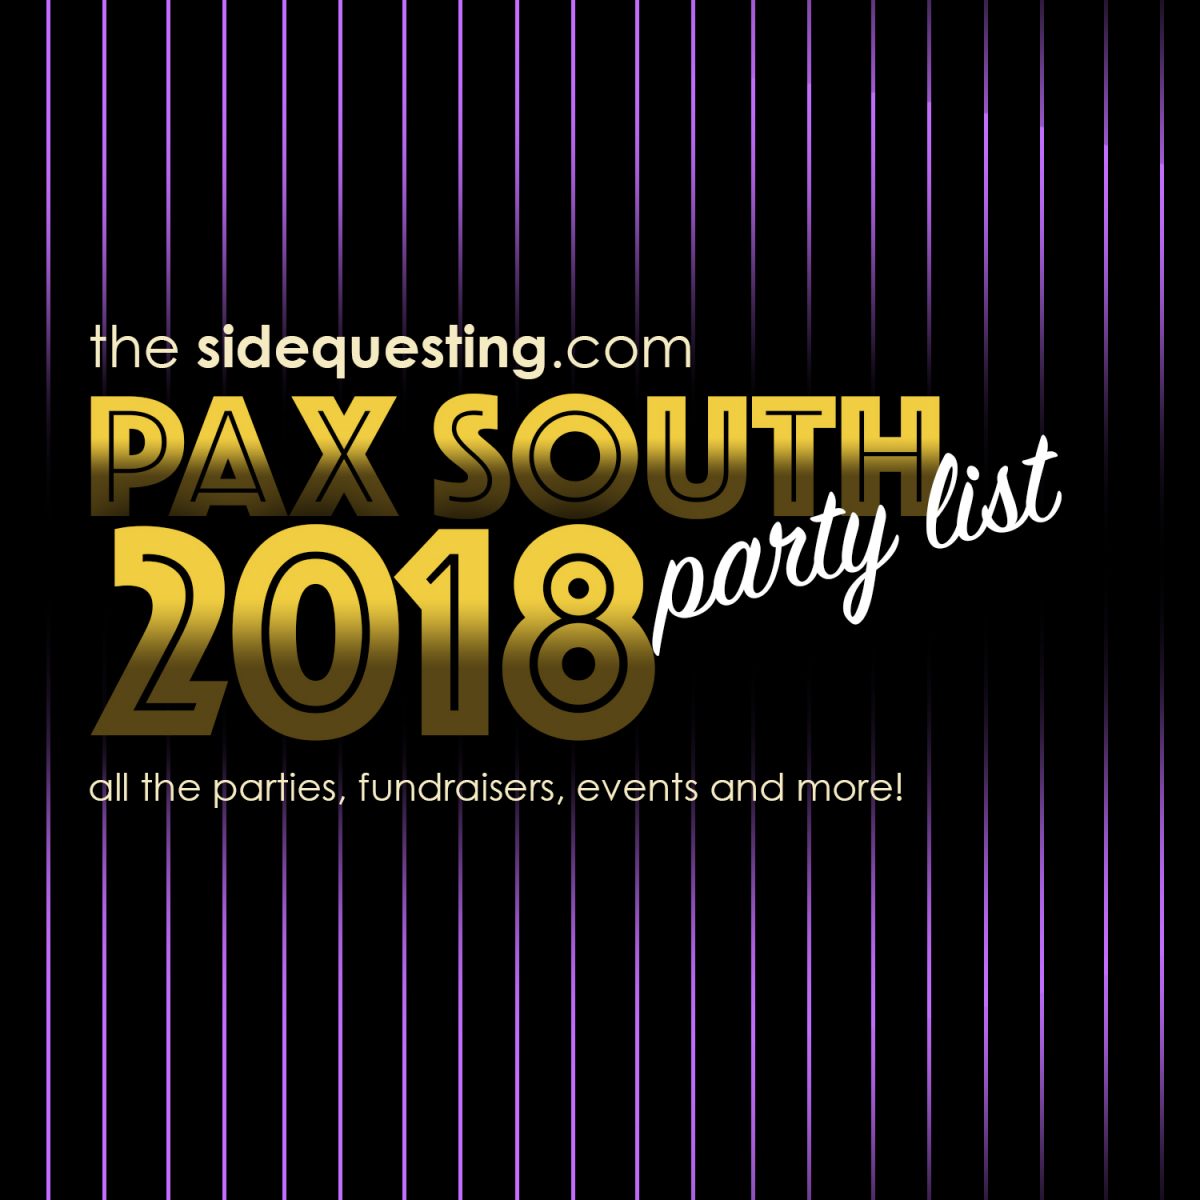 The BIG PAX South 2018 Party List: Parties, Events, and More!